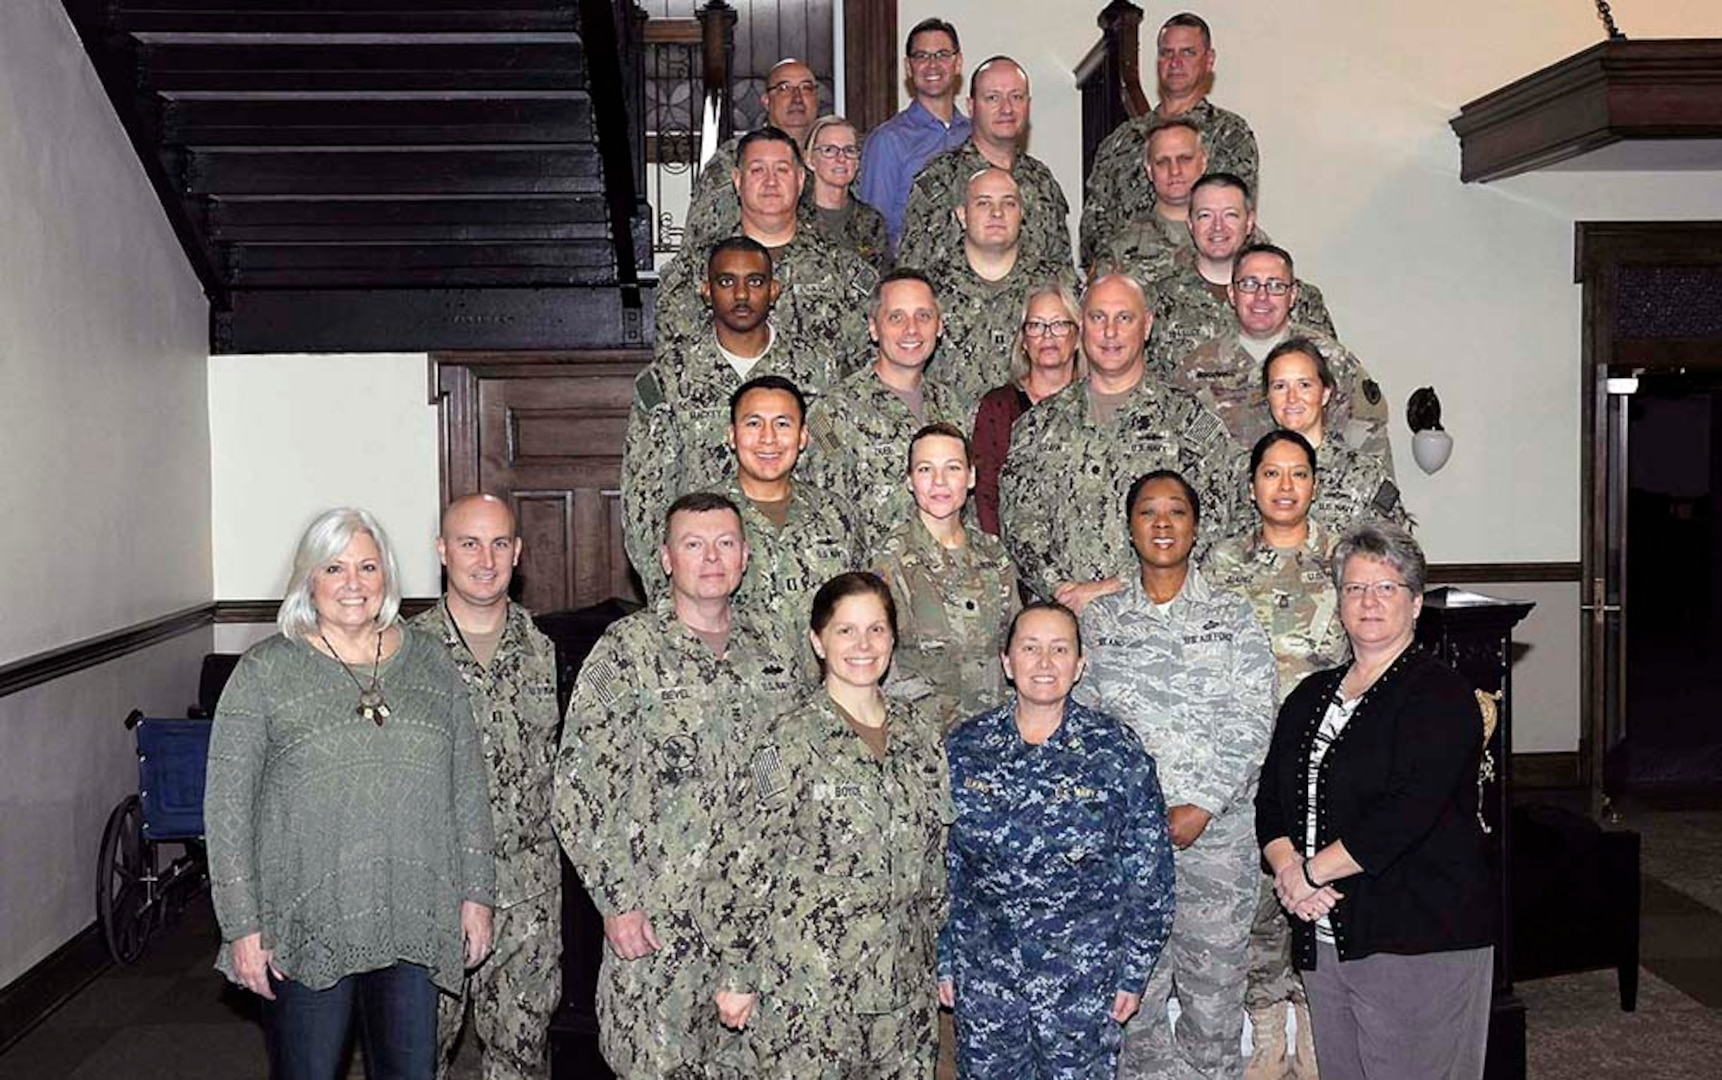 eaders from DLA's Joint Reserve Force, DLA Disposition Service's Joint Reserve Team and expeditionary support personnel in Battle Creek gather for a group shot during the annual Disposal Support Team planning huddle Dec. 14-16.